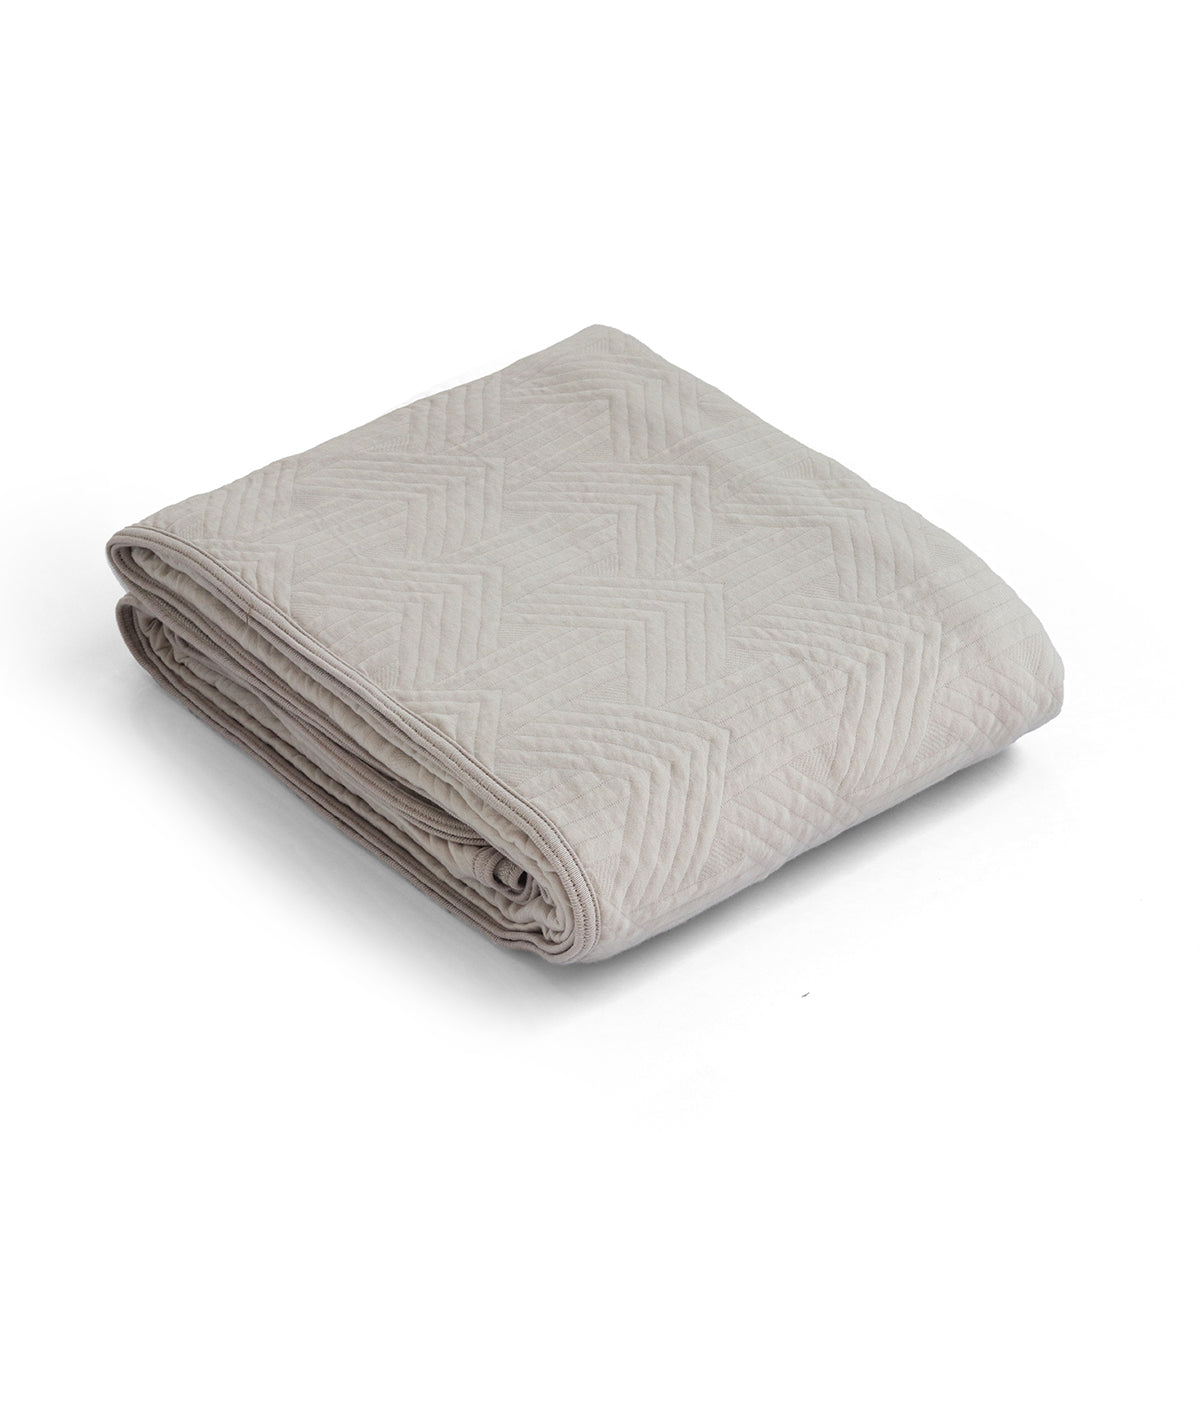 Parquet Texture Cotton Knitted Light weight Quilted Blanket (Silver Cloud)